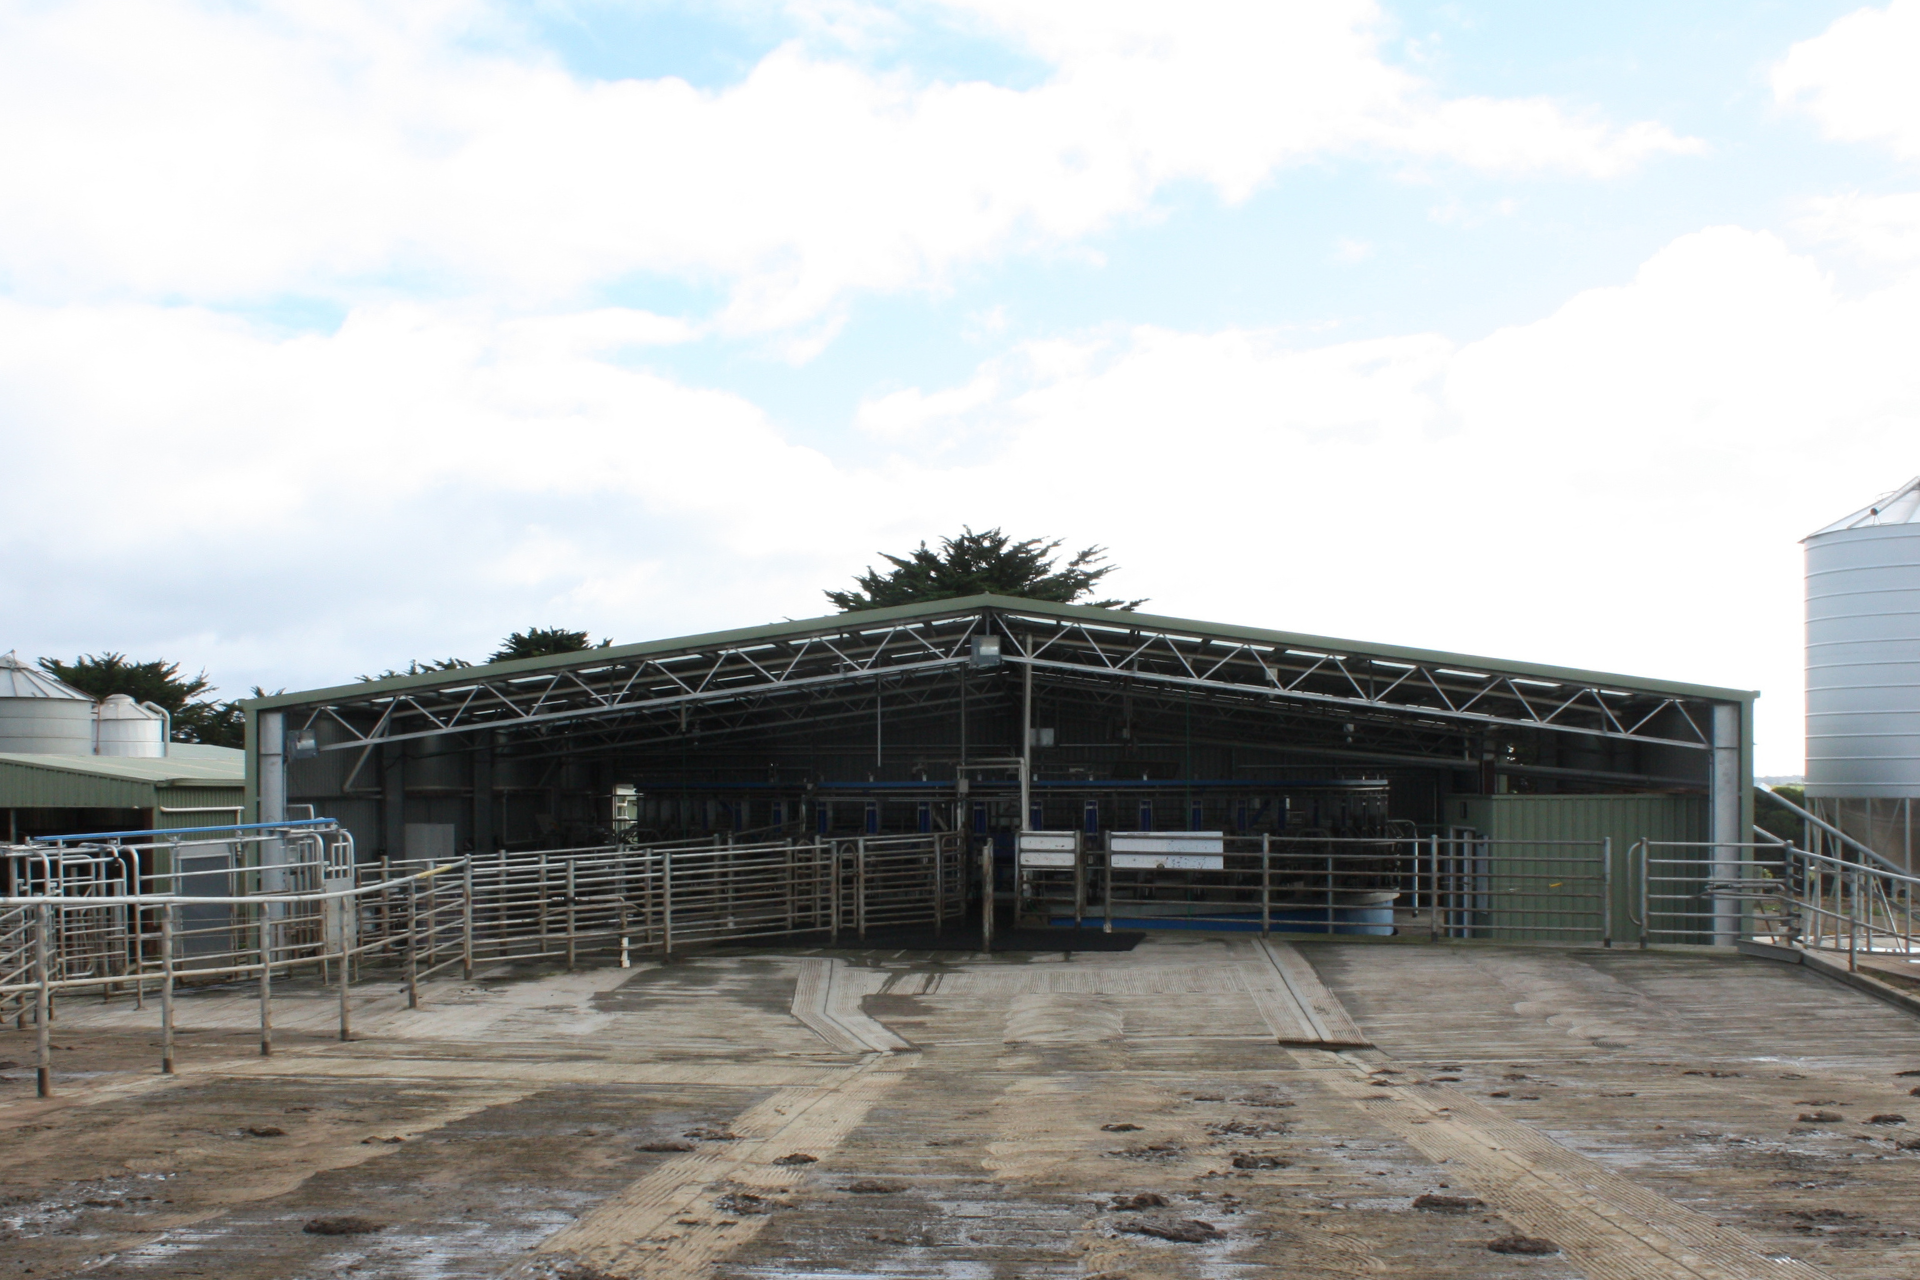 A 22m x 24m x 4m dairy with rotary fit out at Allansford VIC